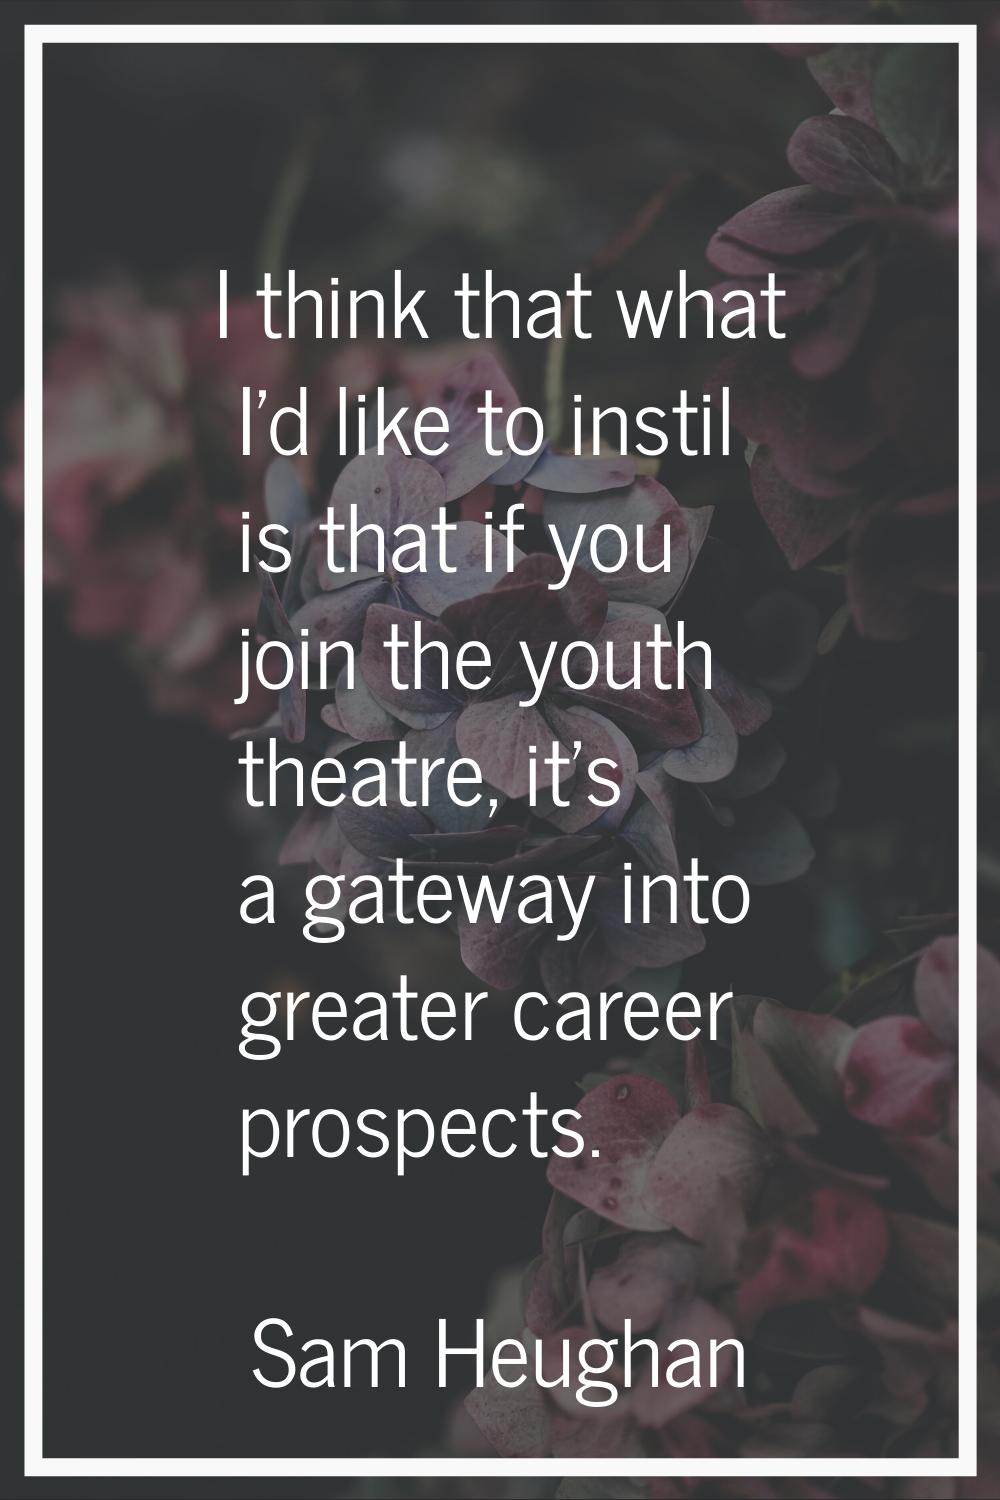 I think that what I'd like to instil is that if you join the youth theatre, it's a gateway into gre